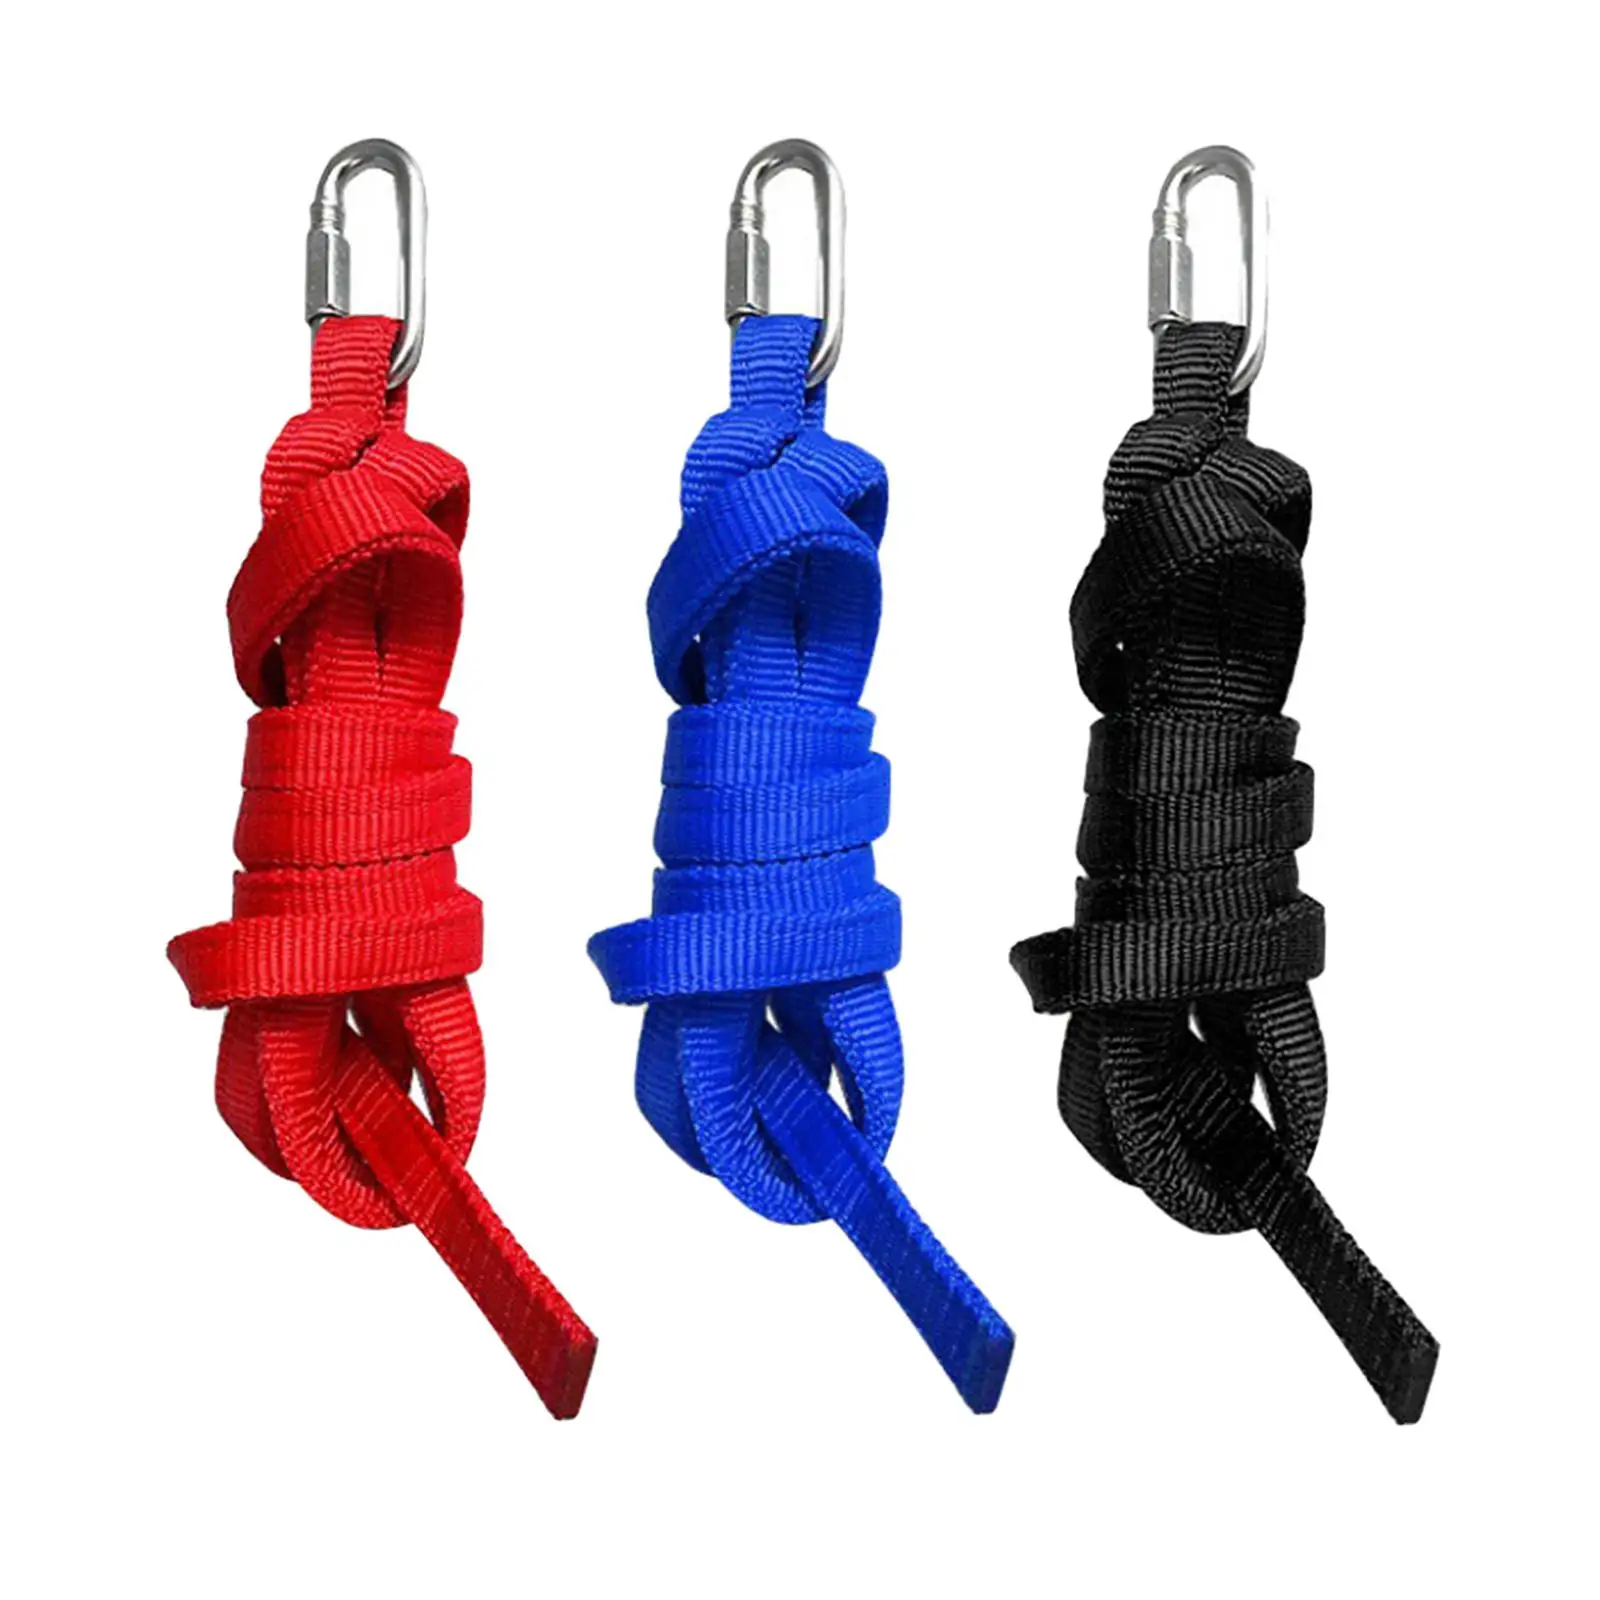 Practical Horse Lead Rope Brass Bolt snap for Leading Training Horse, Goats or Sheep Accessory Heavy Duty Webbing